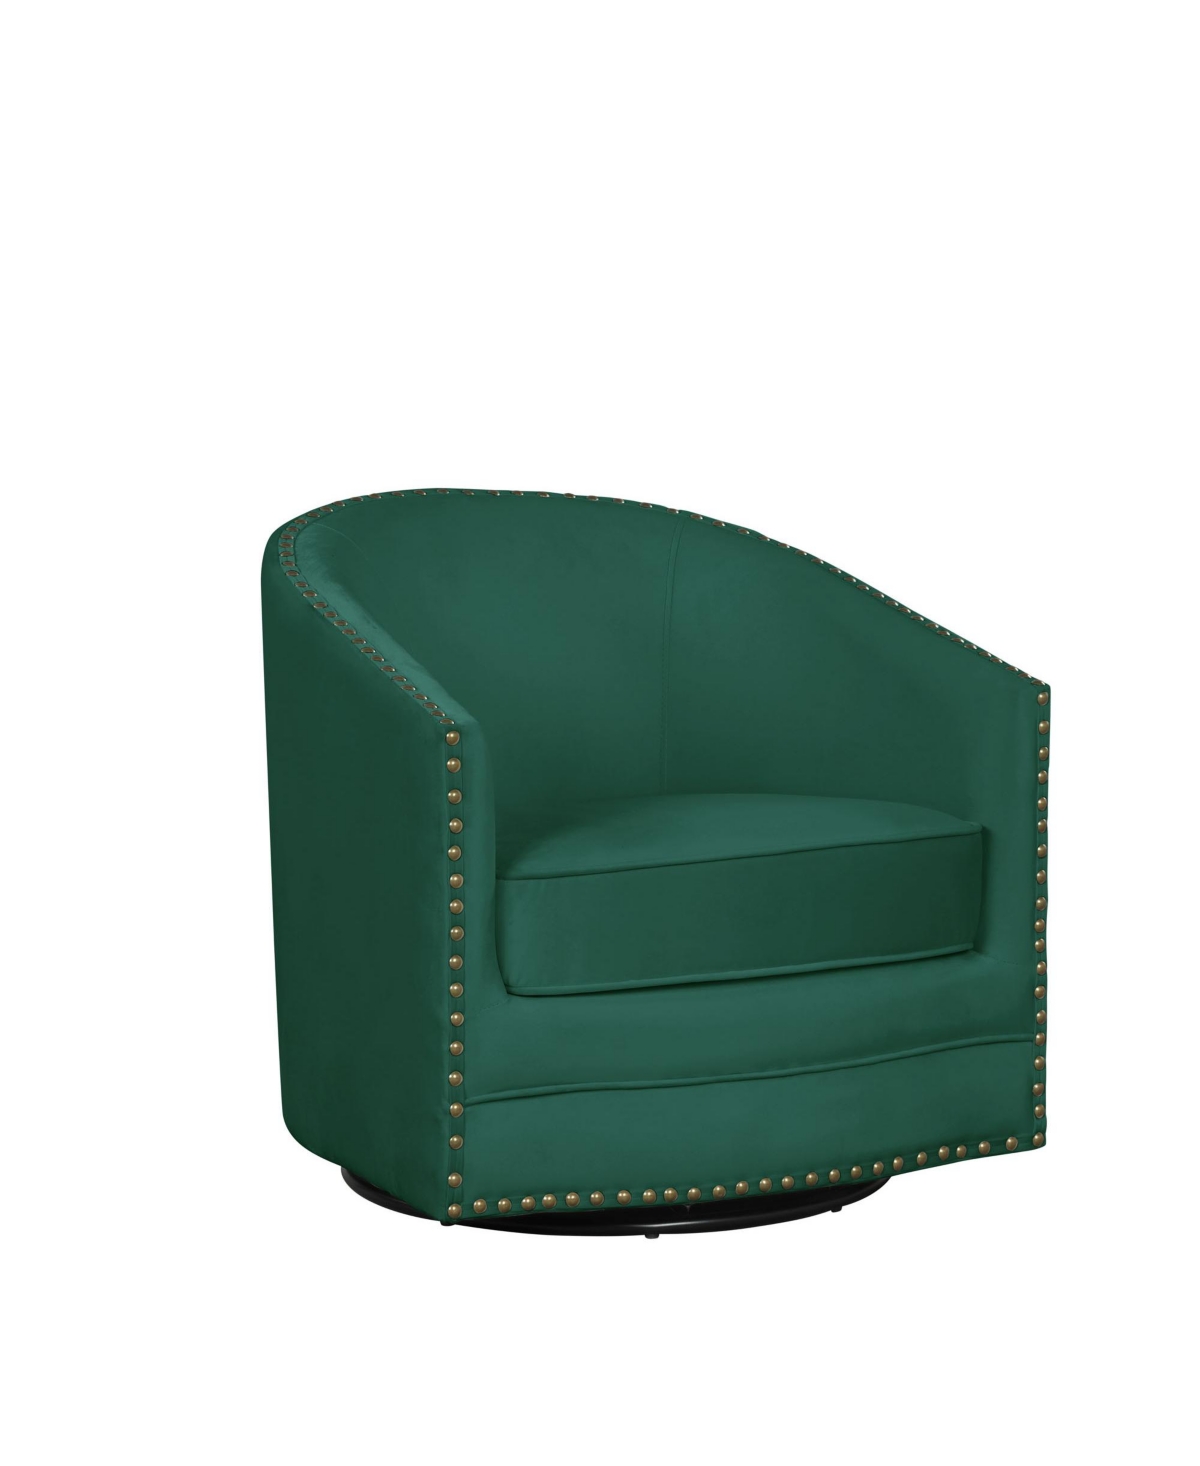 Lifestyle Solutions 28.5" Hailey Swivel Tub Chair In Green